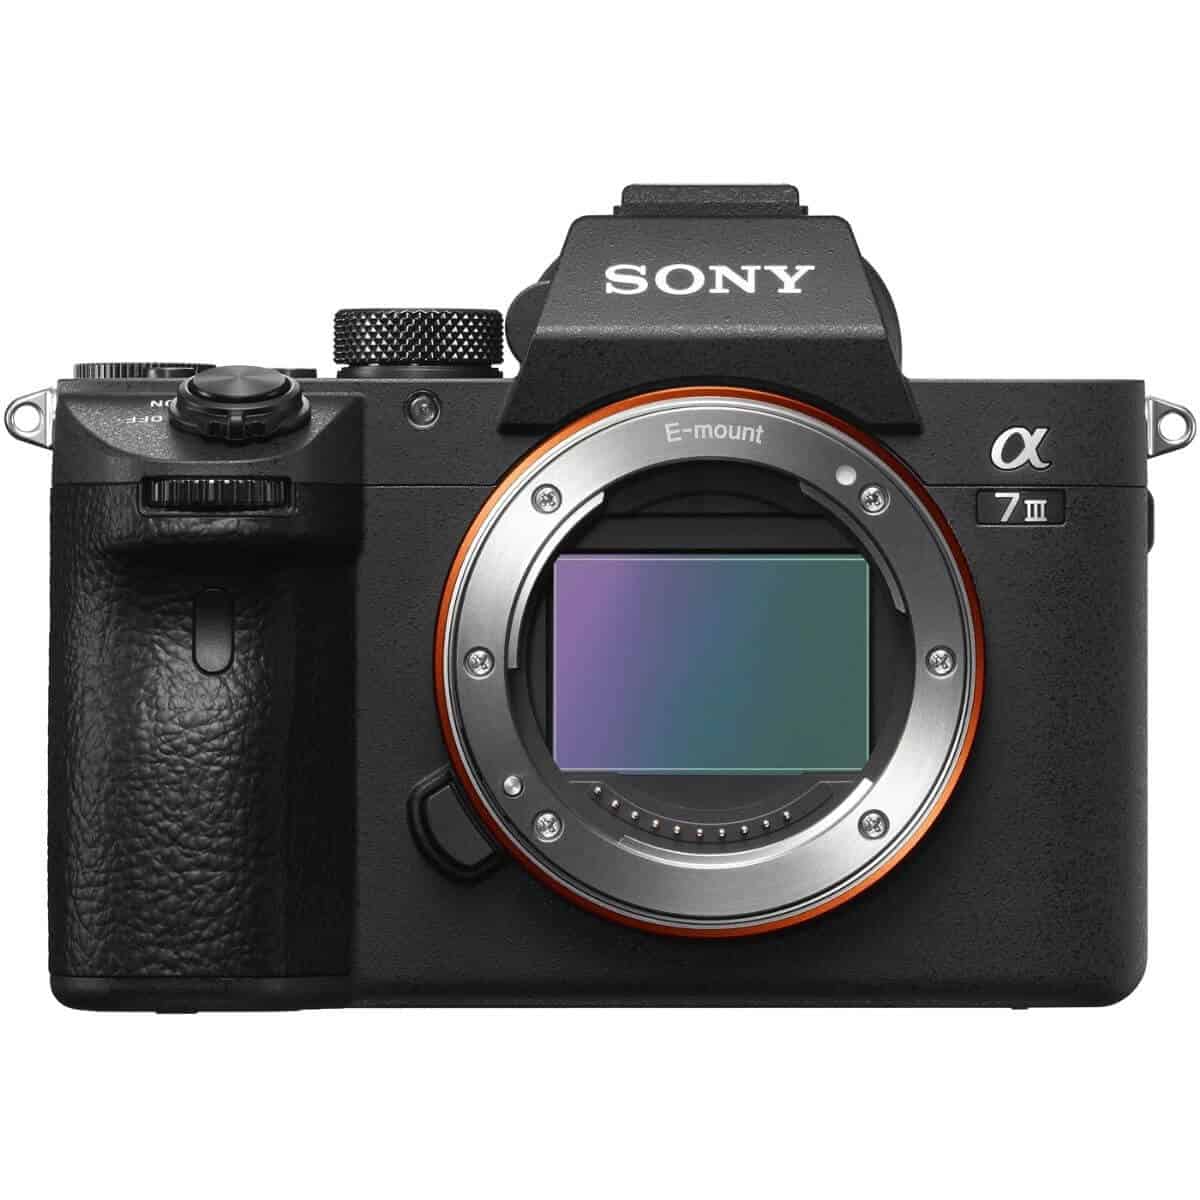 Sony a7 III camera without the lens.